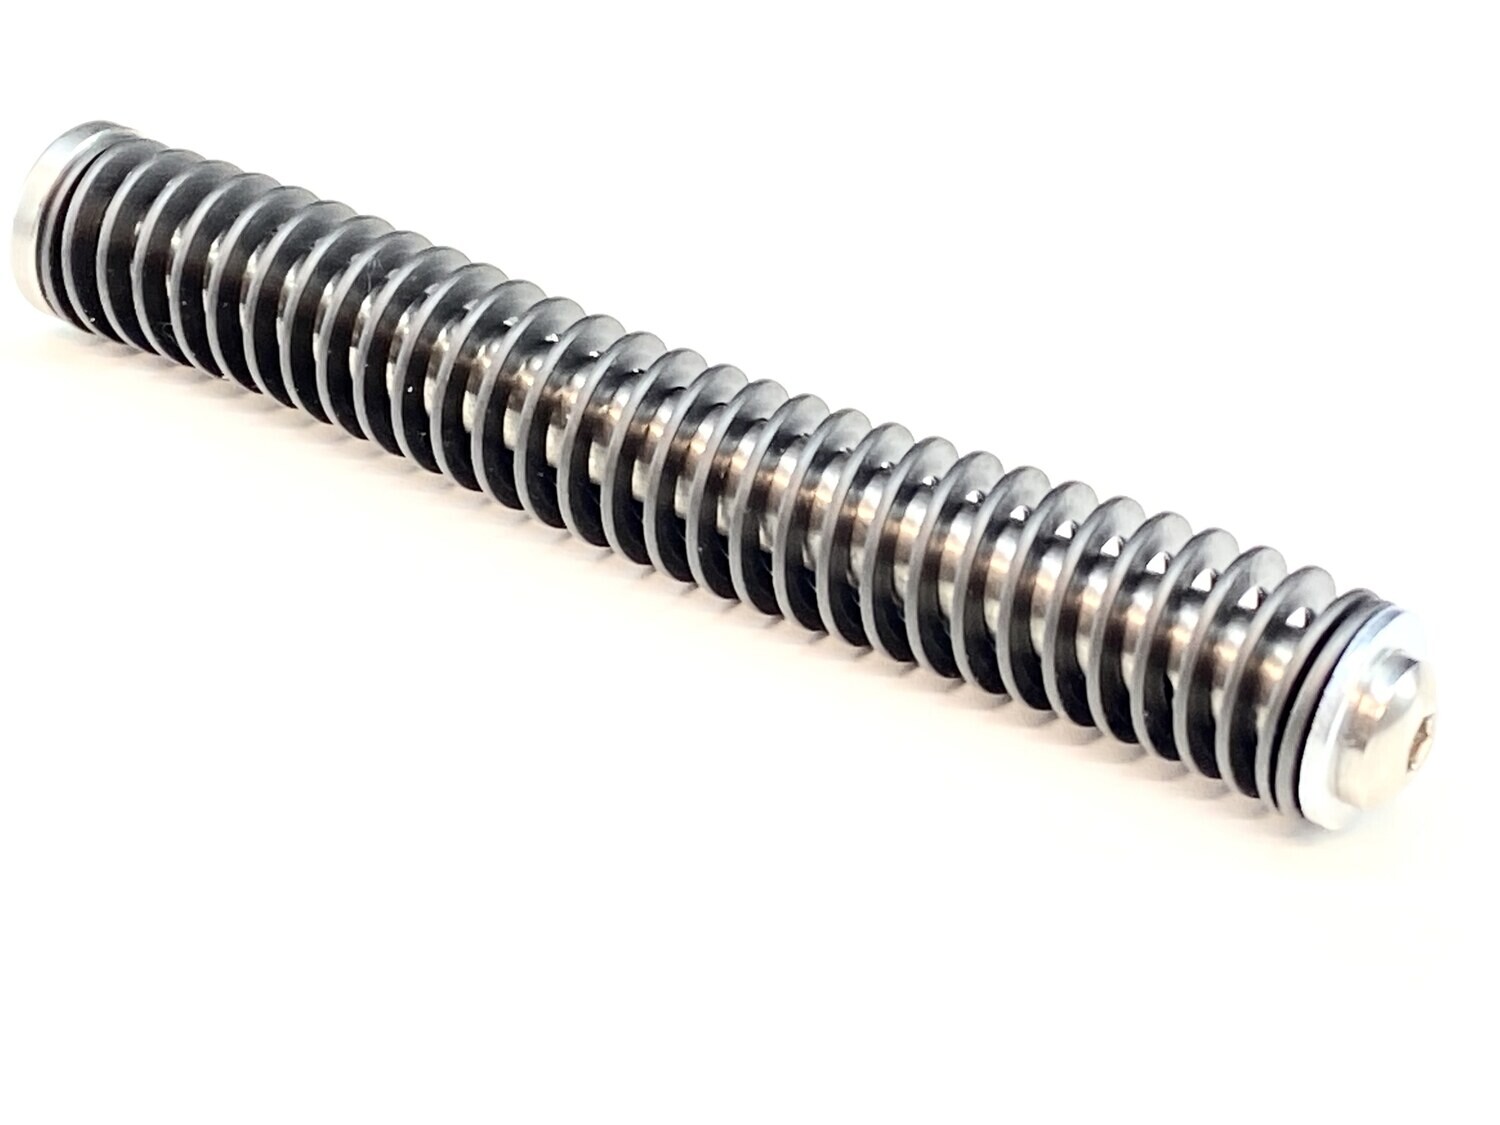 Stainless Steel Guide Rod and Recoil Spring Assembly Gen3 - - Glock 17, 22, 24, 31, 34, 35, 37